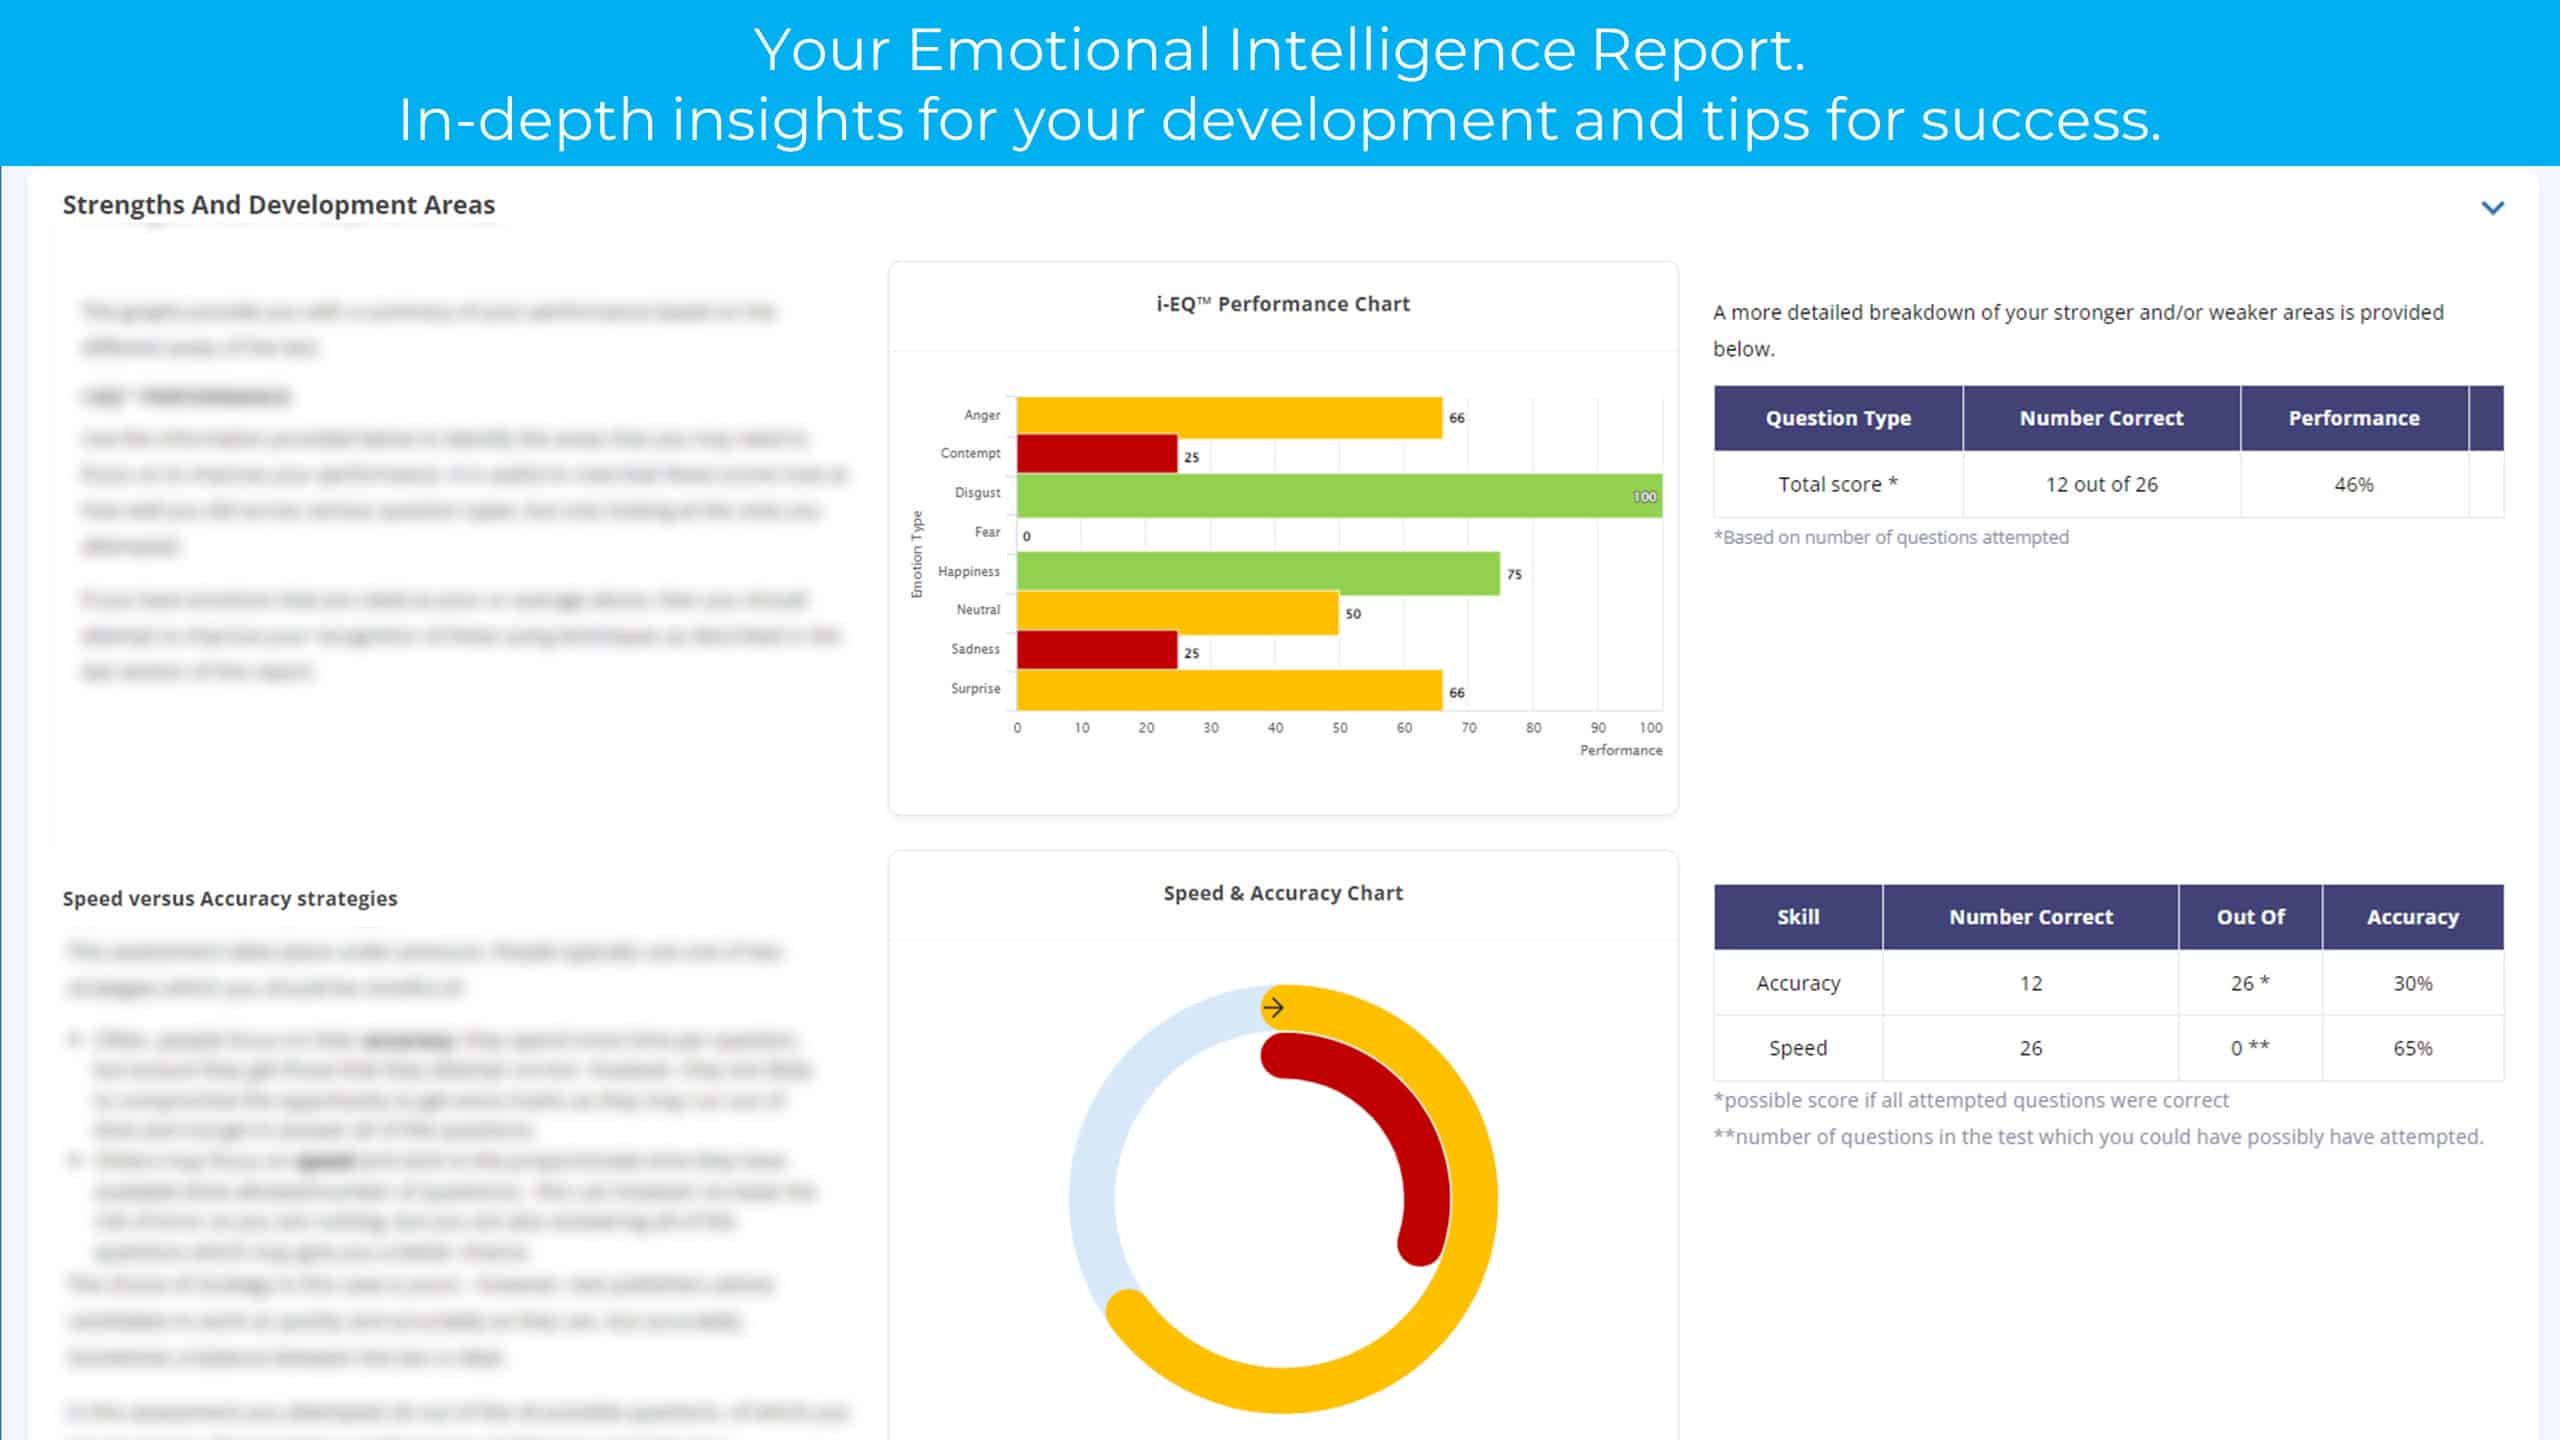 gamified-assessment-emotional-intelligence-practice-4126016-1024x576